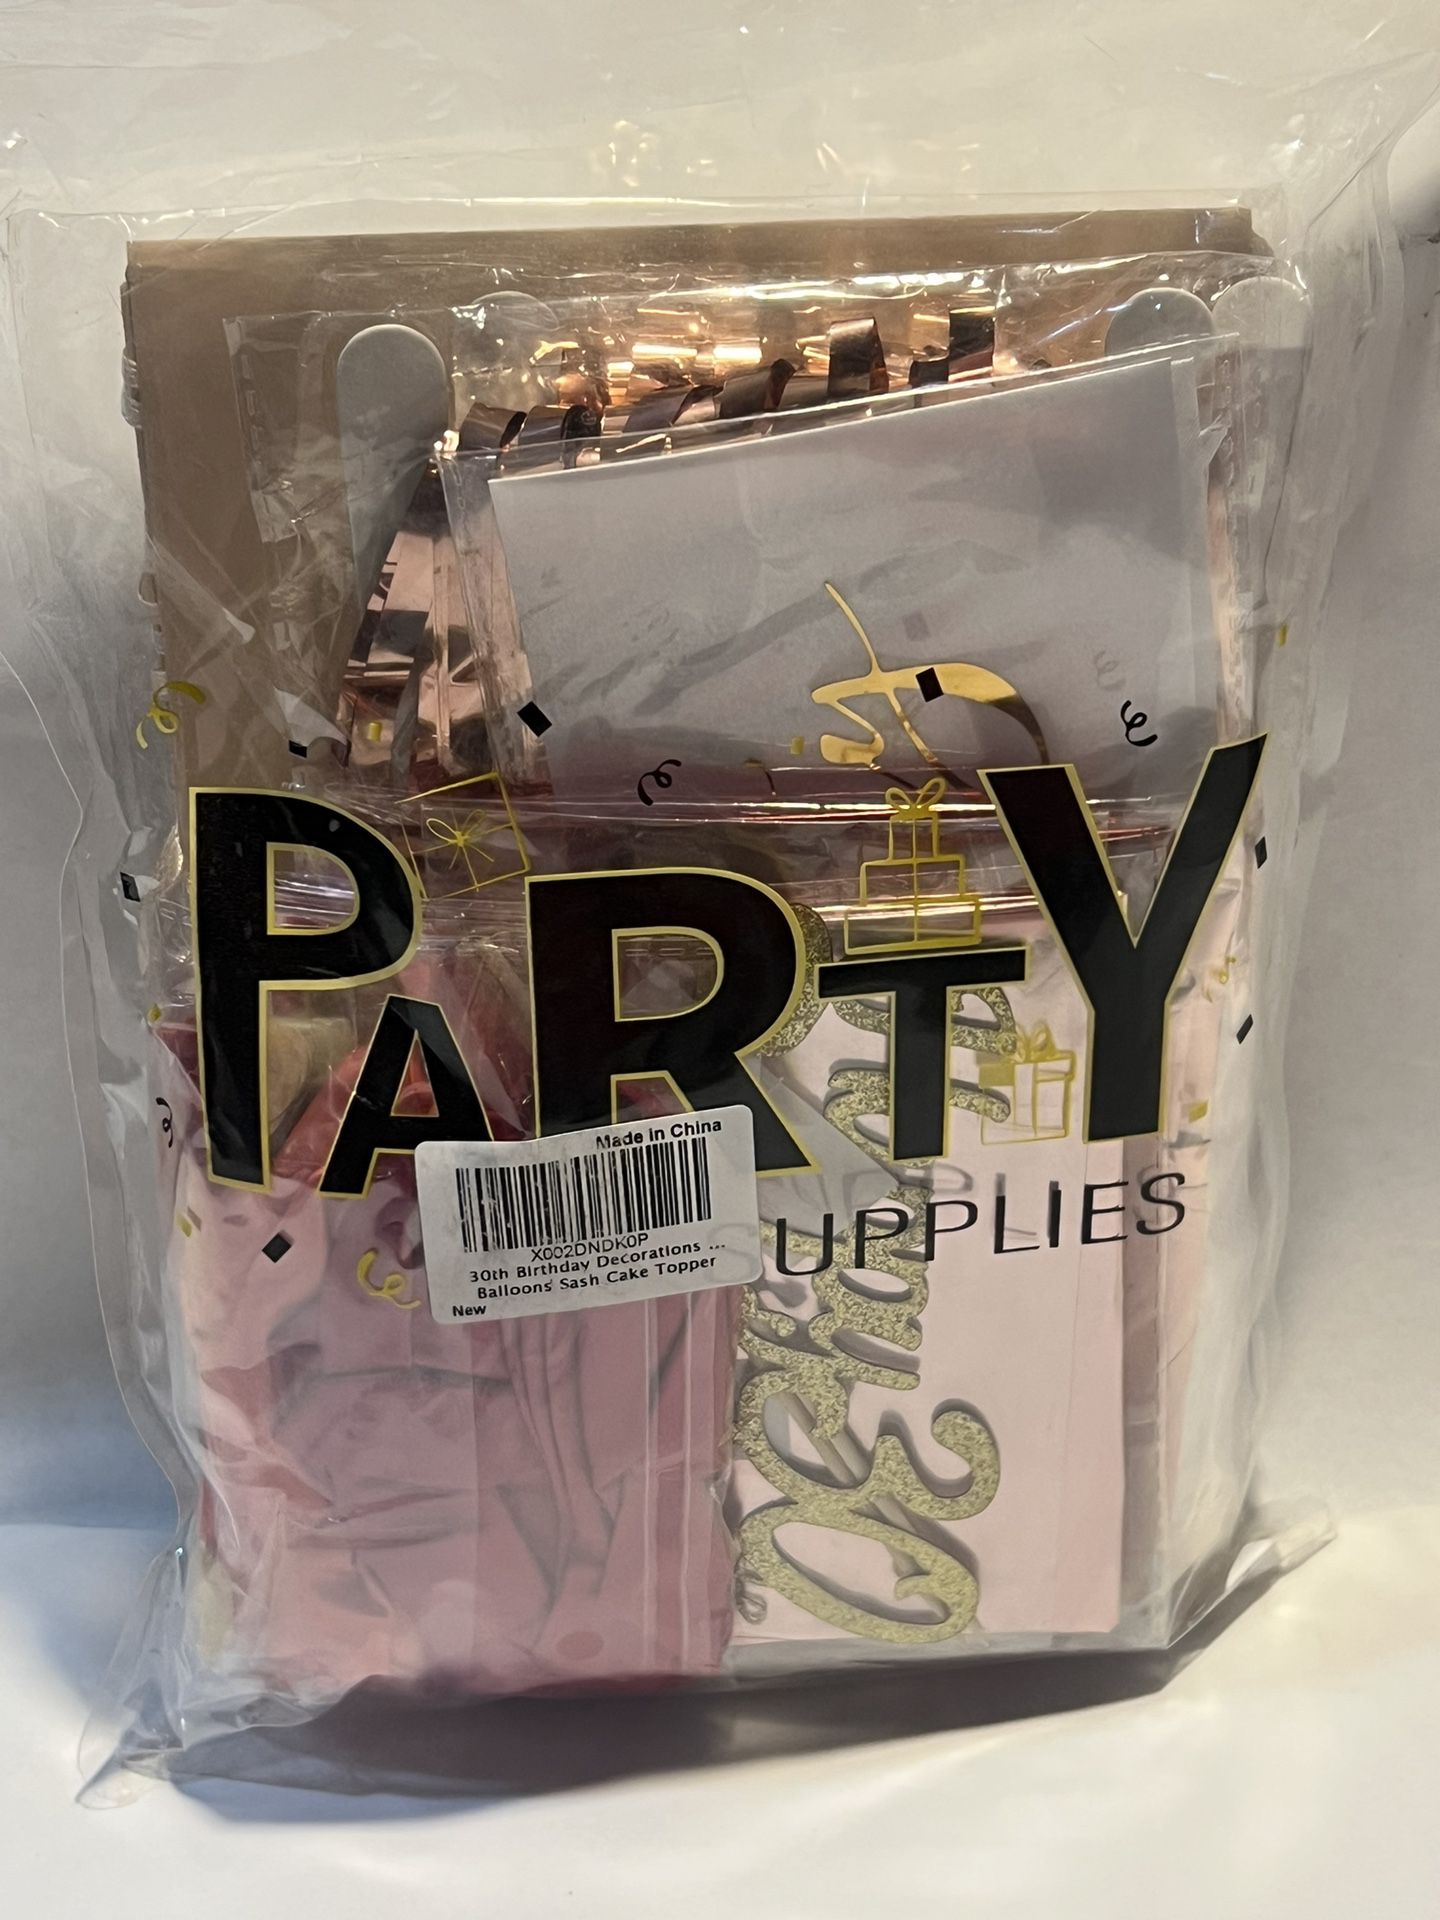 Happy 30th Birthday Supplies and Decorations package 